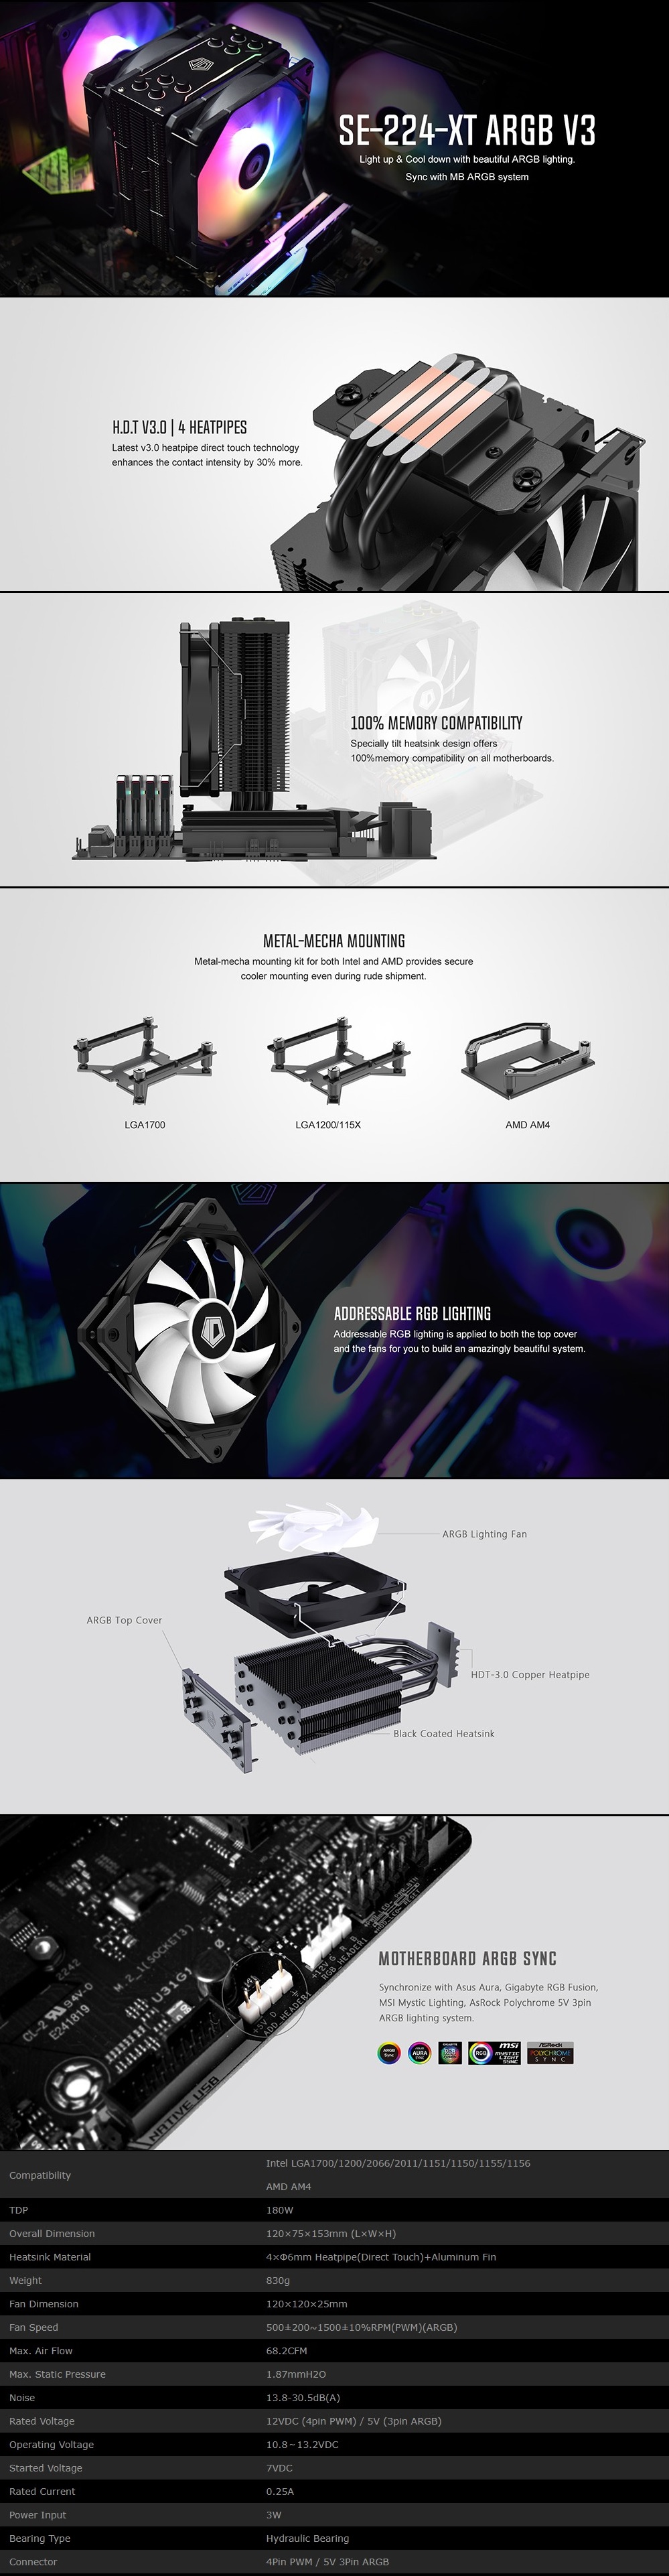 A large marketing image providing additional information about the product ID-COOLING Sweden Series SE-224-XT ARGB V3 CPU Cooler - Additional alt info not provided